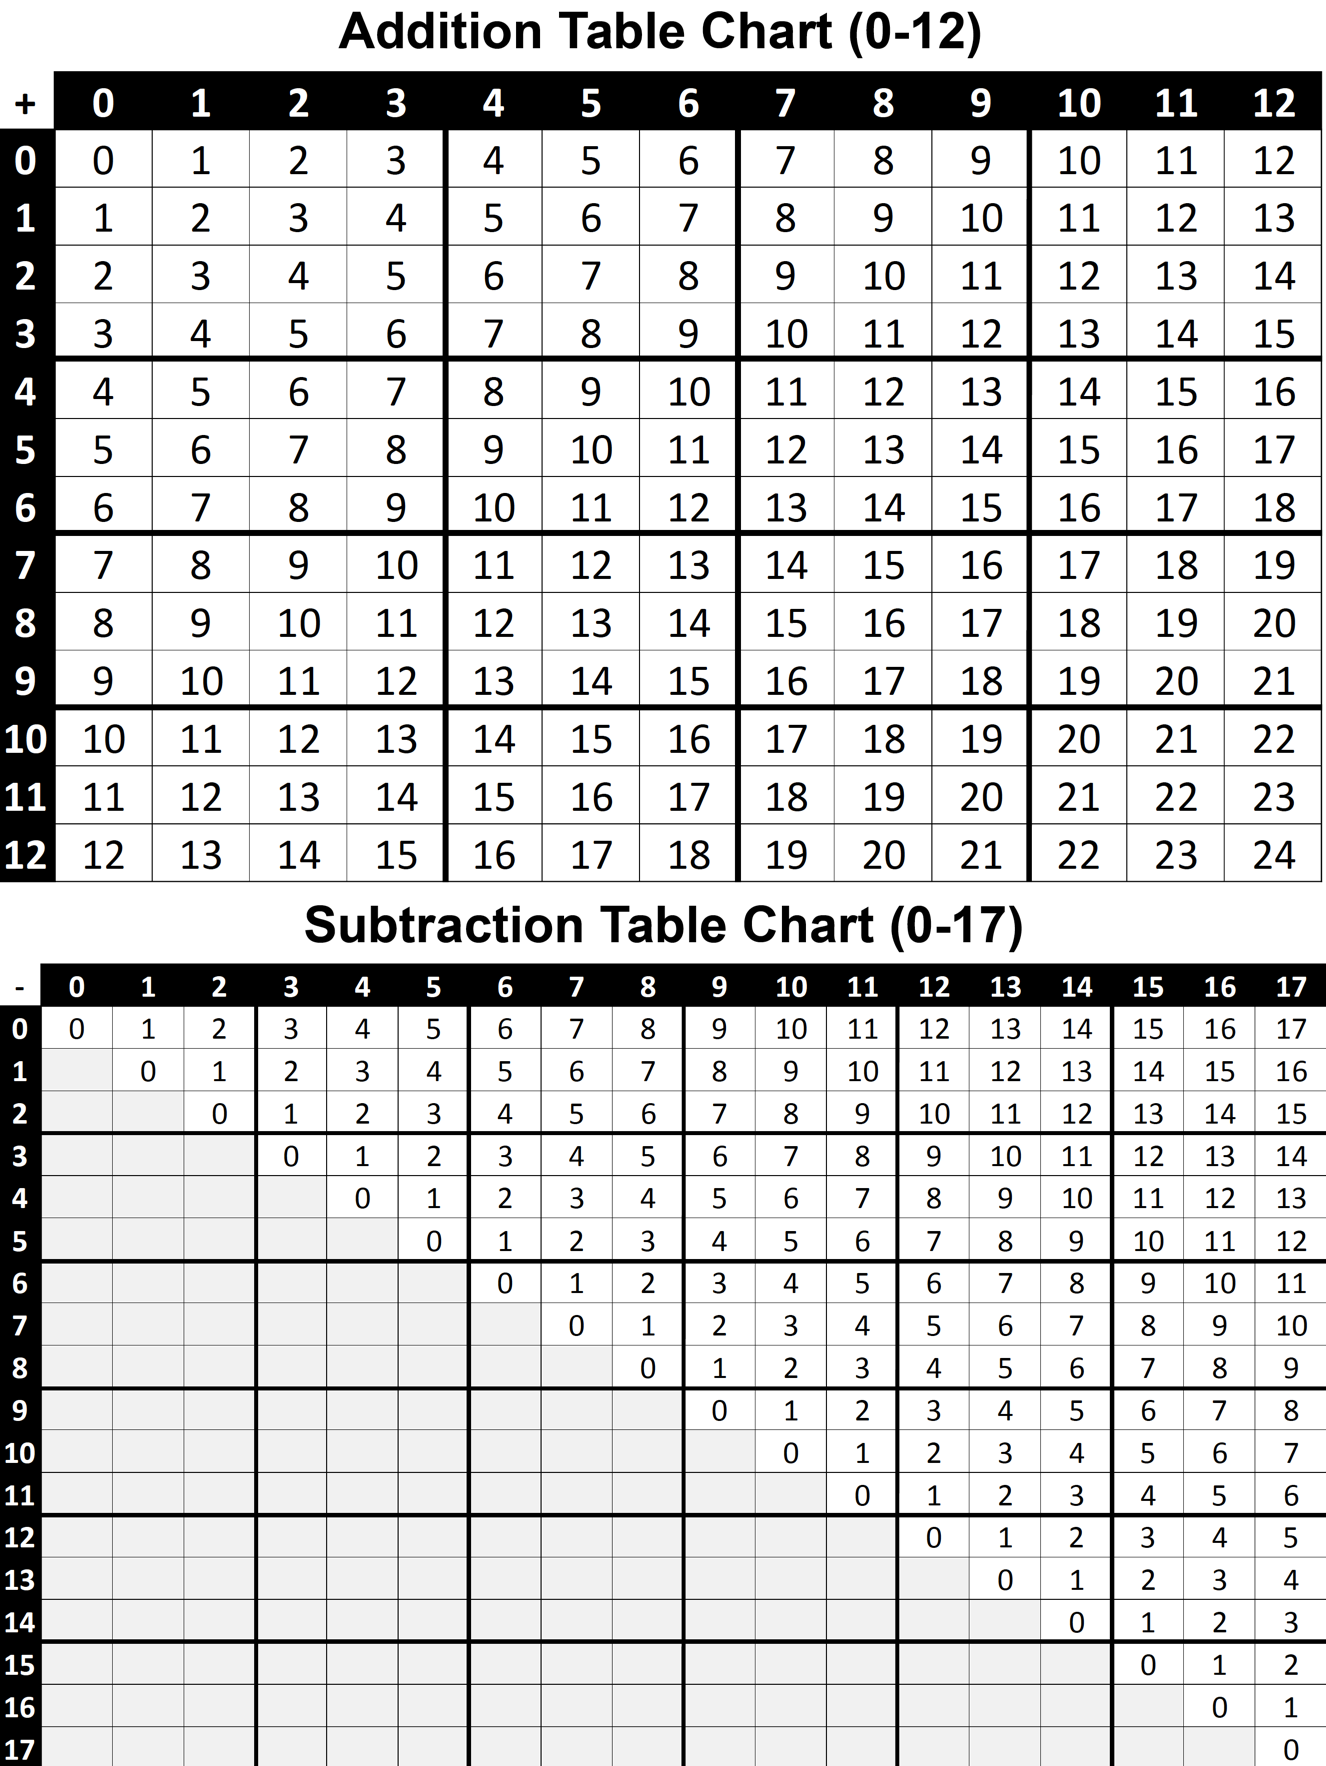 Addition and Subtraction Table Charts 0-12 Printable PDF (FREE)